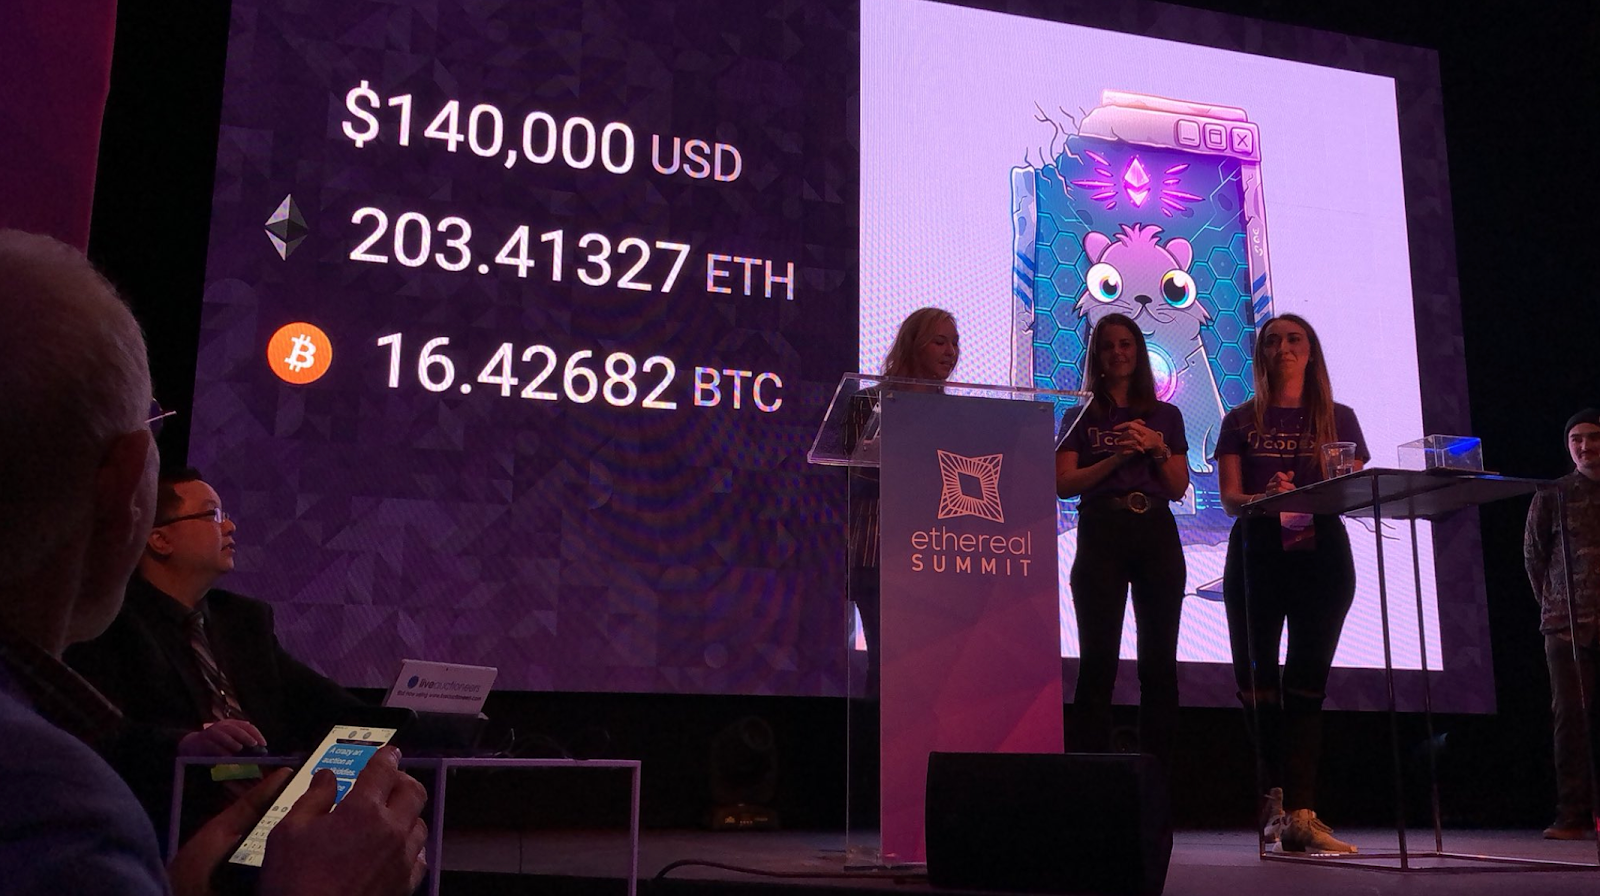 The Ethereal Summit and the $140K cat | by CryptoKitties ...